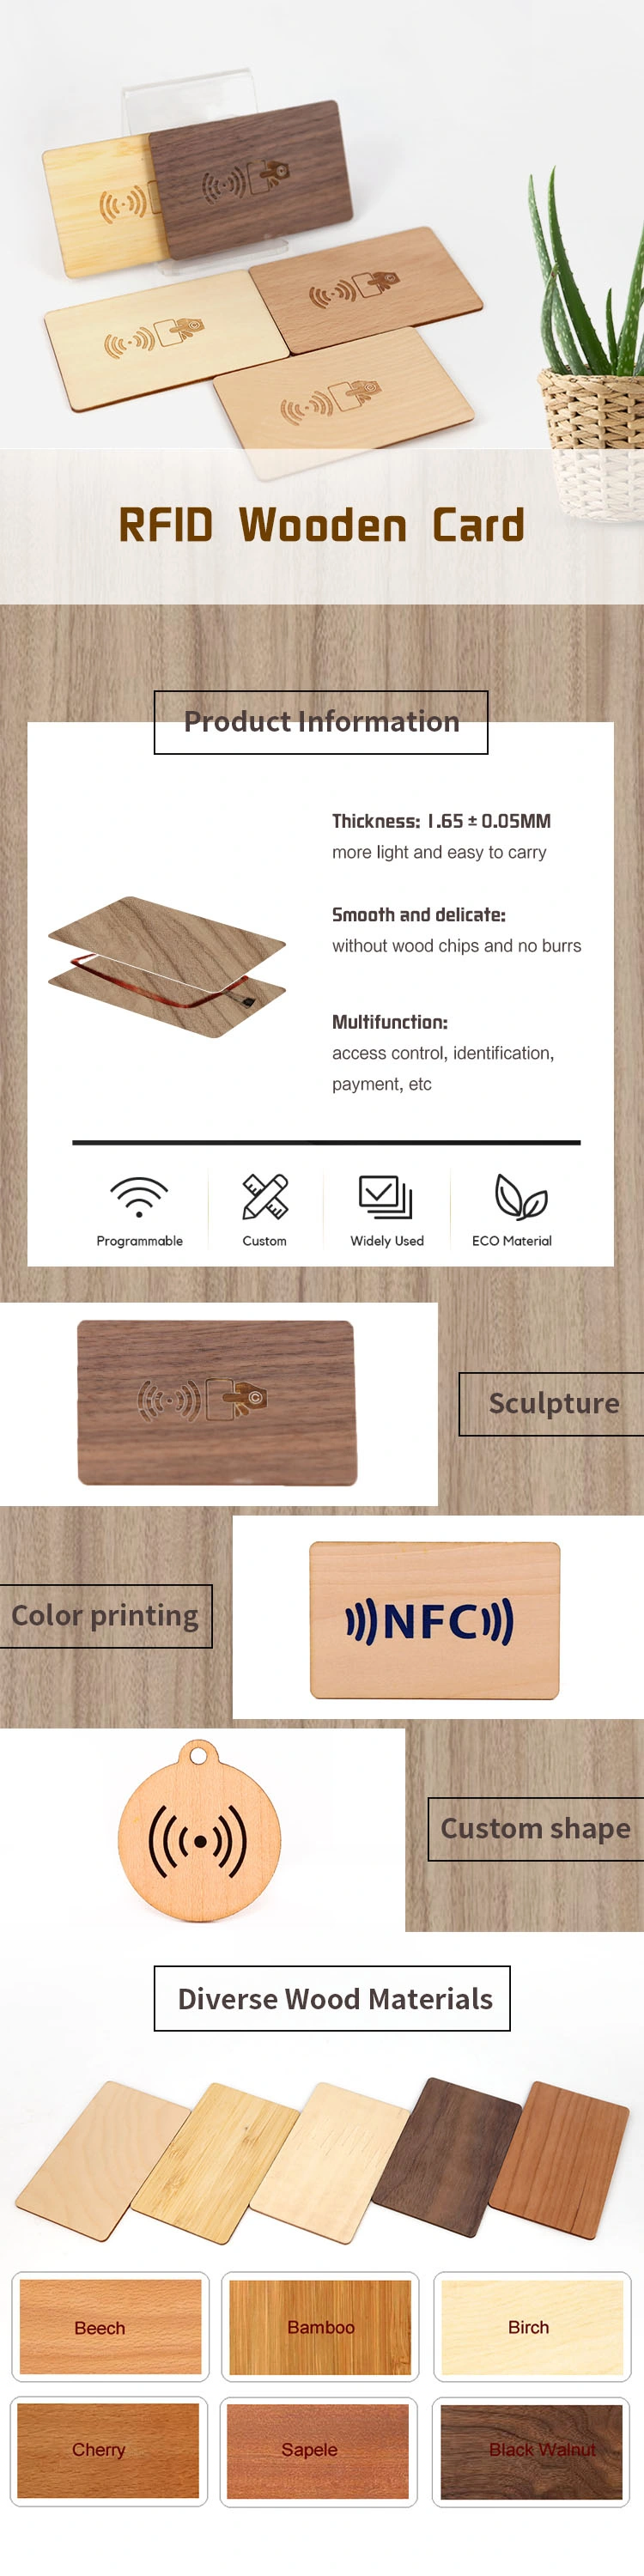 Non Standard Size RFID Wooden Card Hotel Door Access Control Bamboo Card